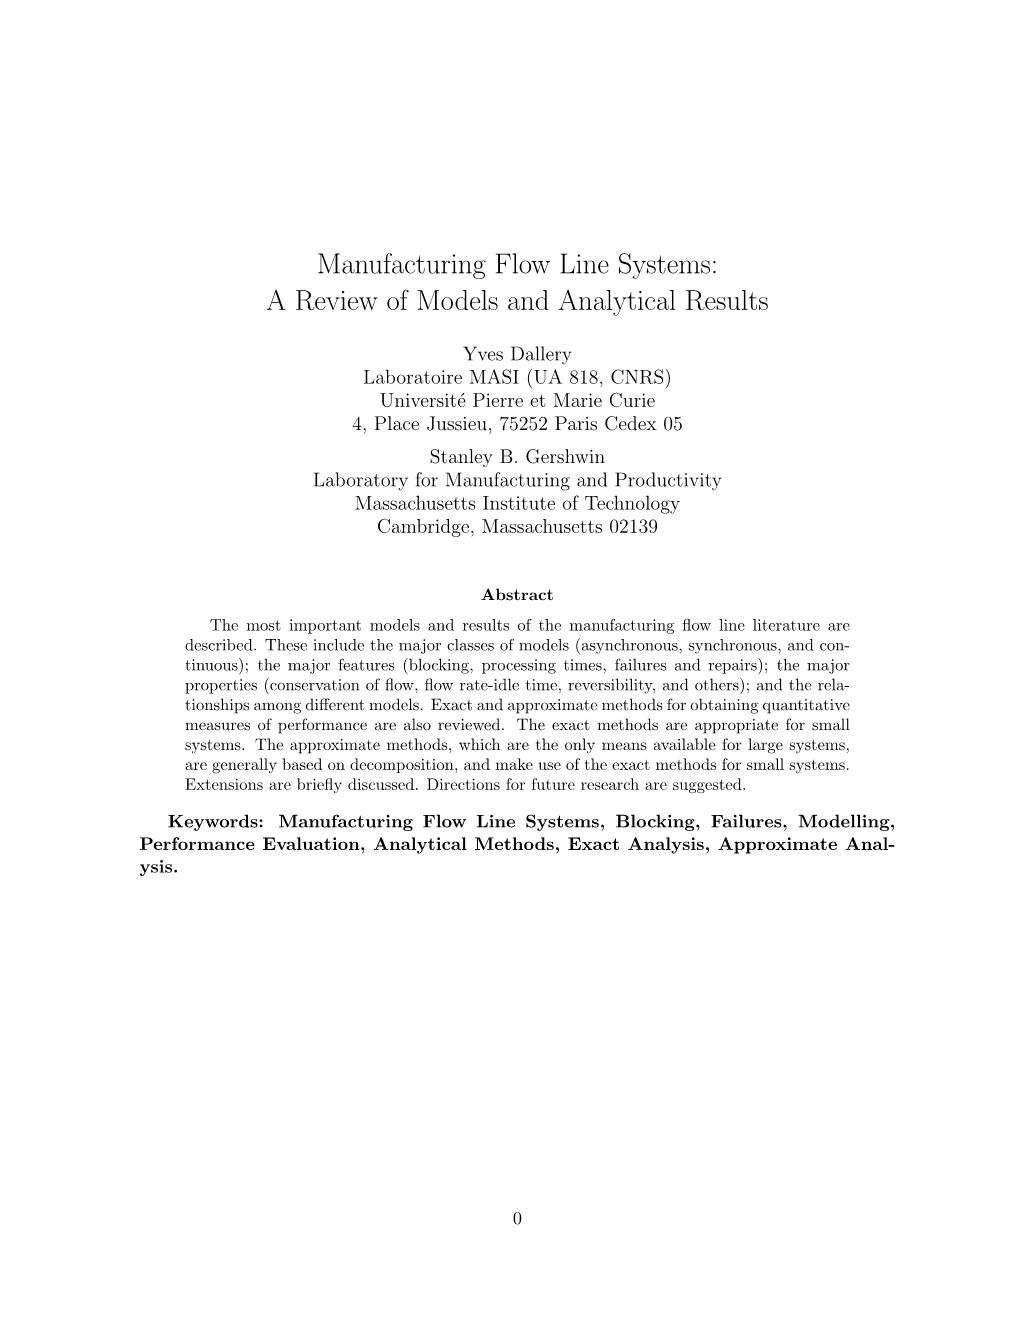 Manufacturing Flow Line Systems: a Review of Models and Analytical Results